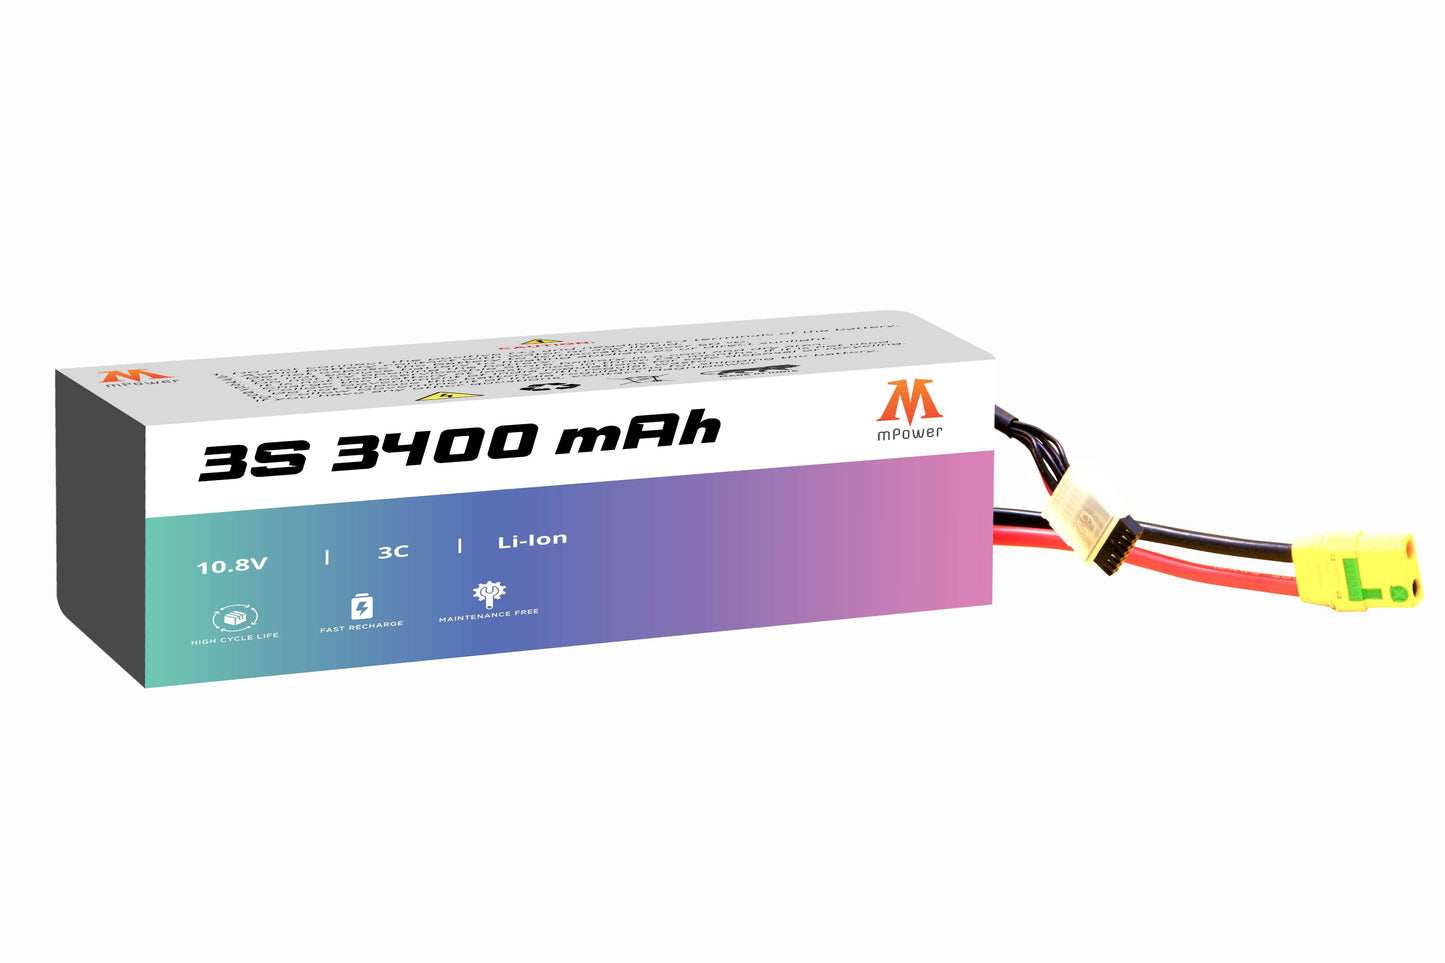 mPower 3S 3400mAh Lithium-Ion Battery for Survey Drones